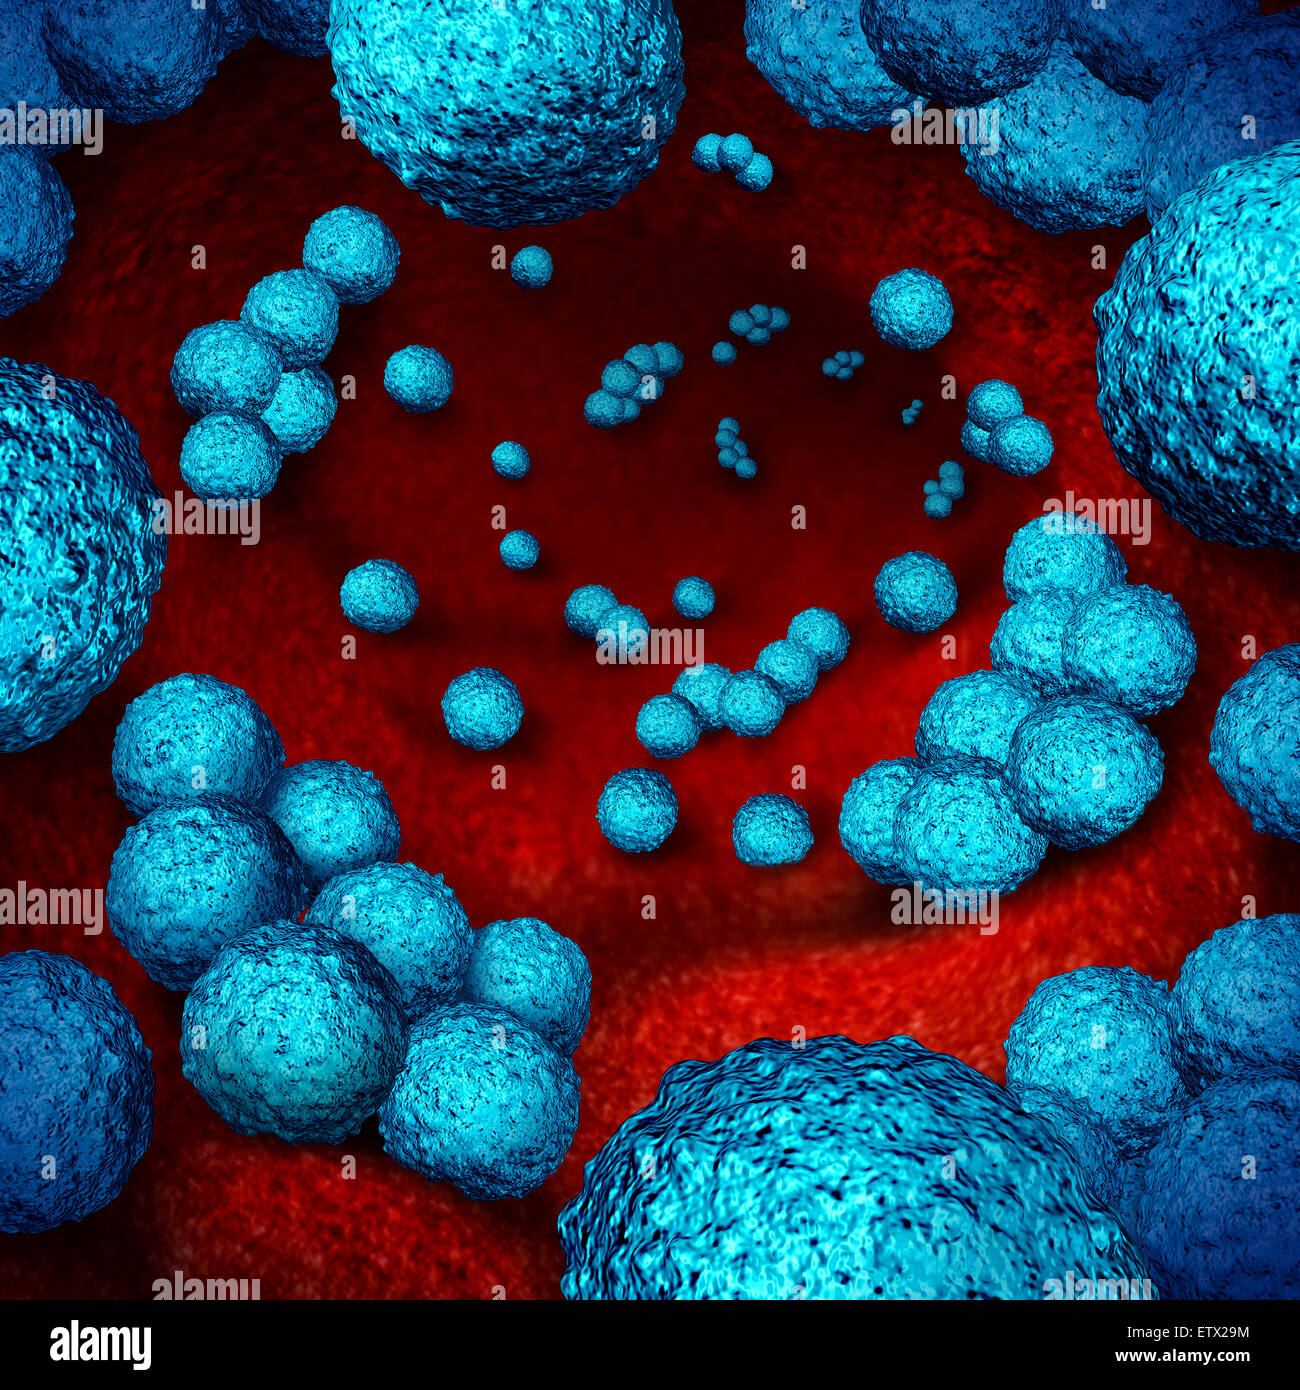 Superbug bacteria or MRSA medical healthcare concept and antimicrobial resistance health risk symbol as a three dimensional illustration of bacterium infection inside the human body as an icon of multidrug resistant microscopic organisms. Stock Photo